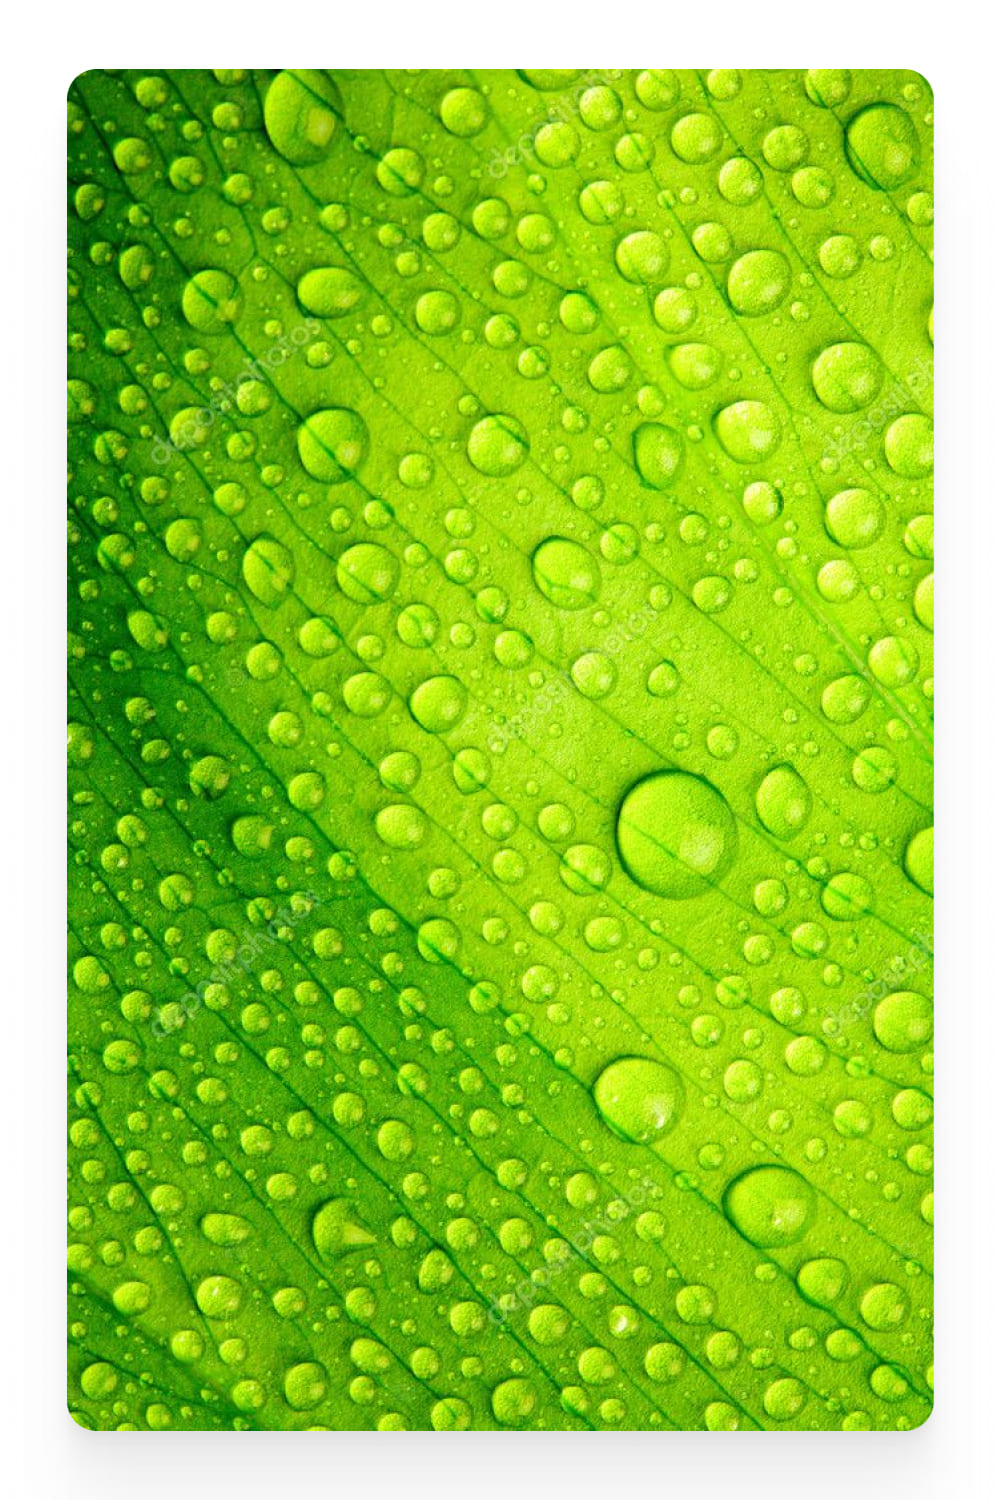 Photo of water drops on a bright green leaf.